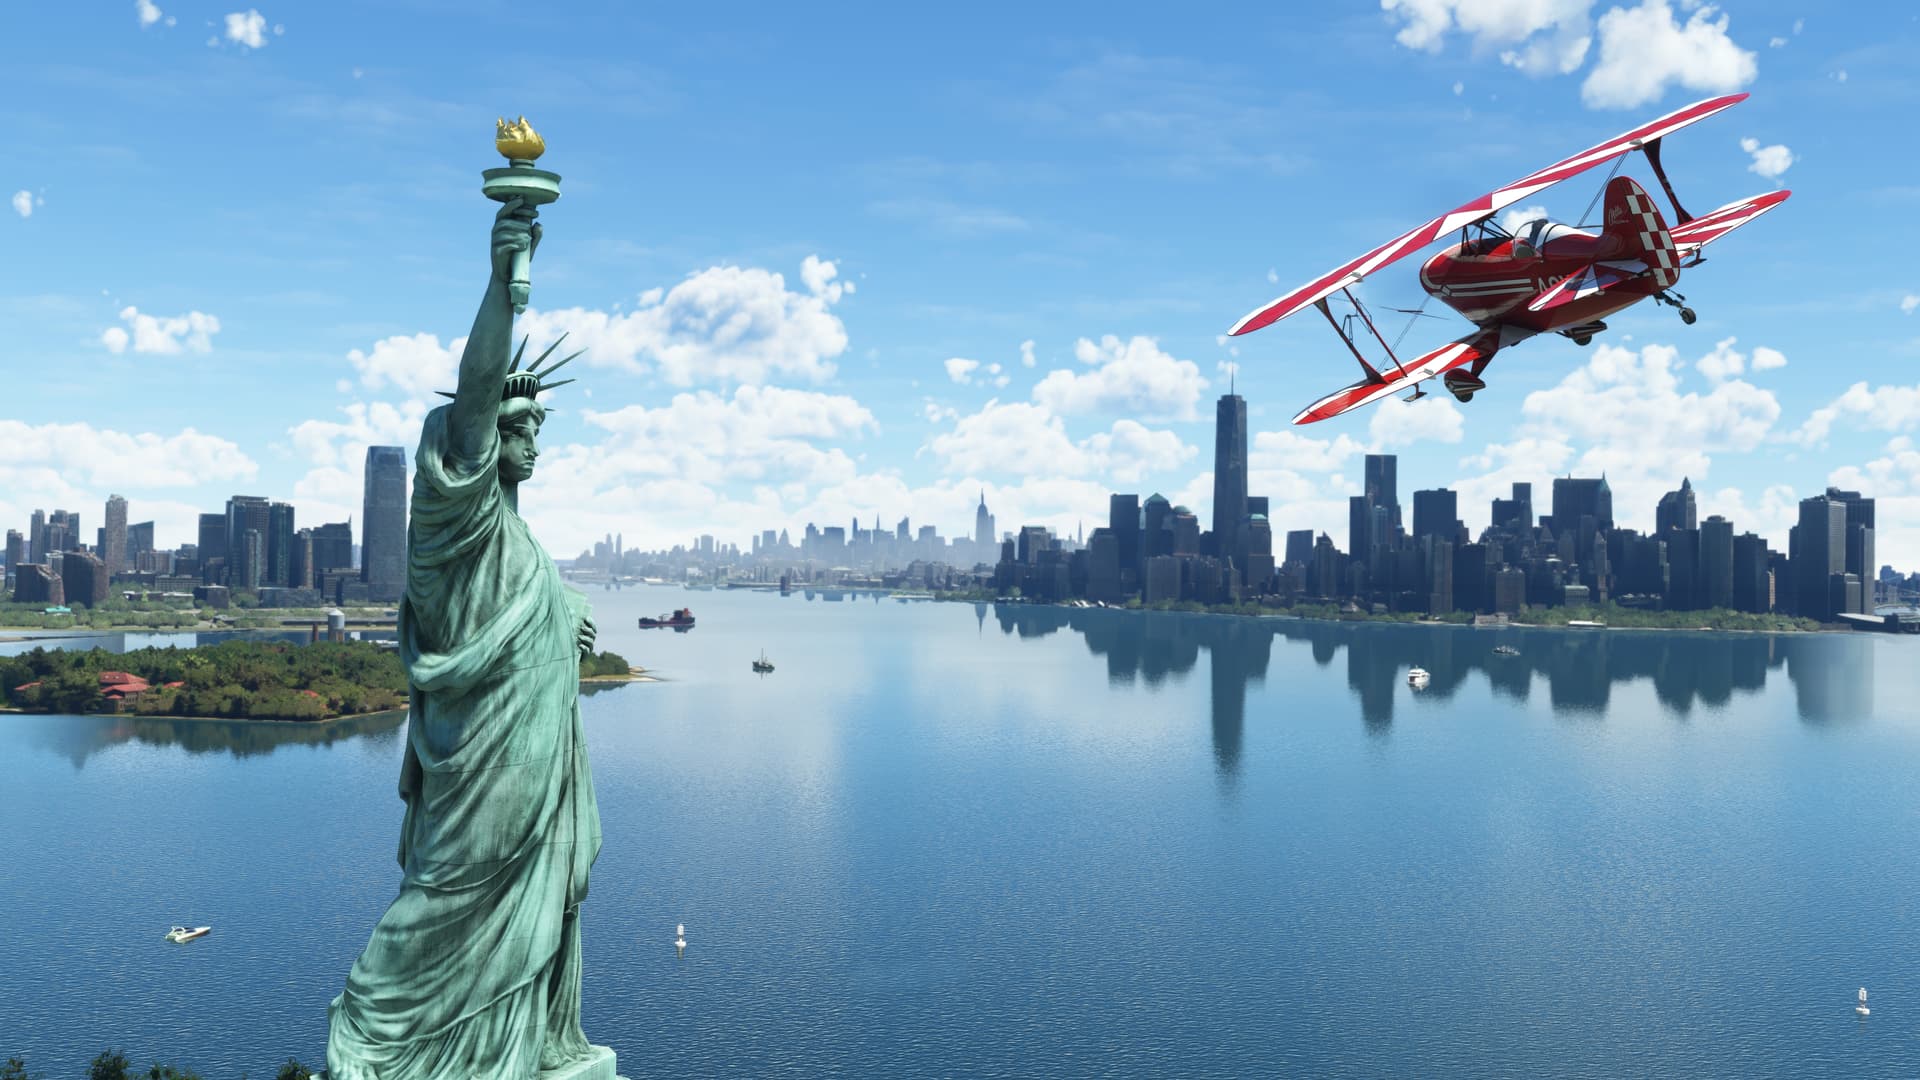 Flight Simulator returns to the United States for latest World Update makeover